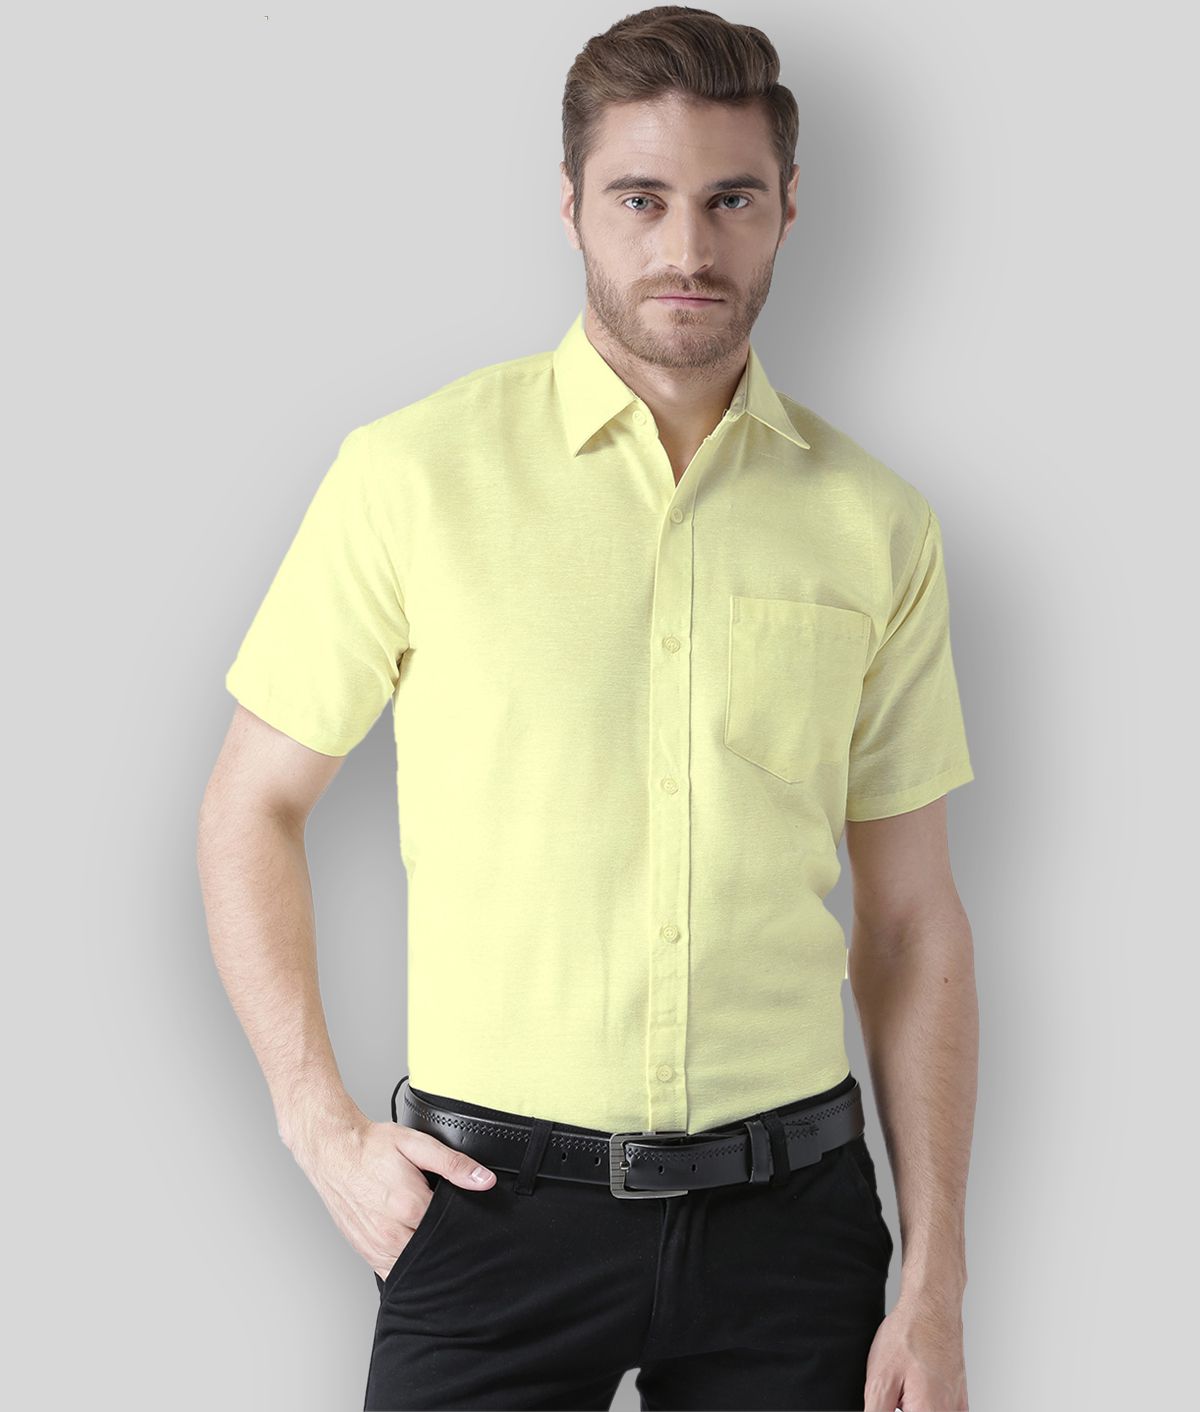     			RIAG - Yellow Cotton Regular Fit Men's Casual Shirt (Pack of 1 )